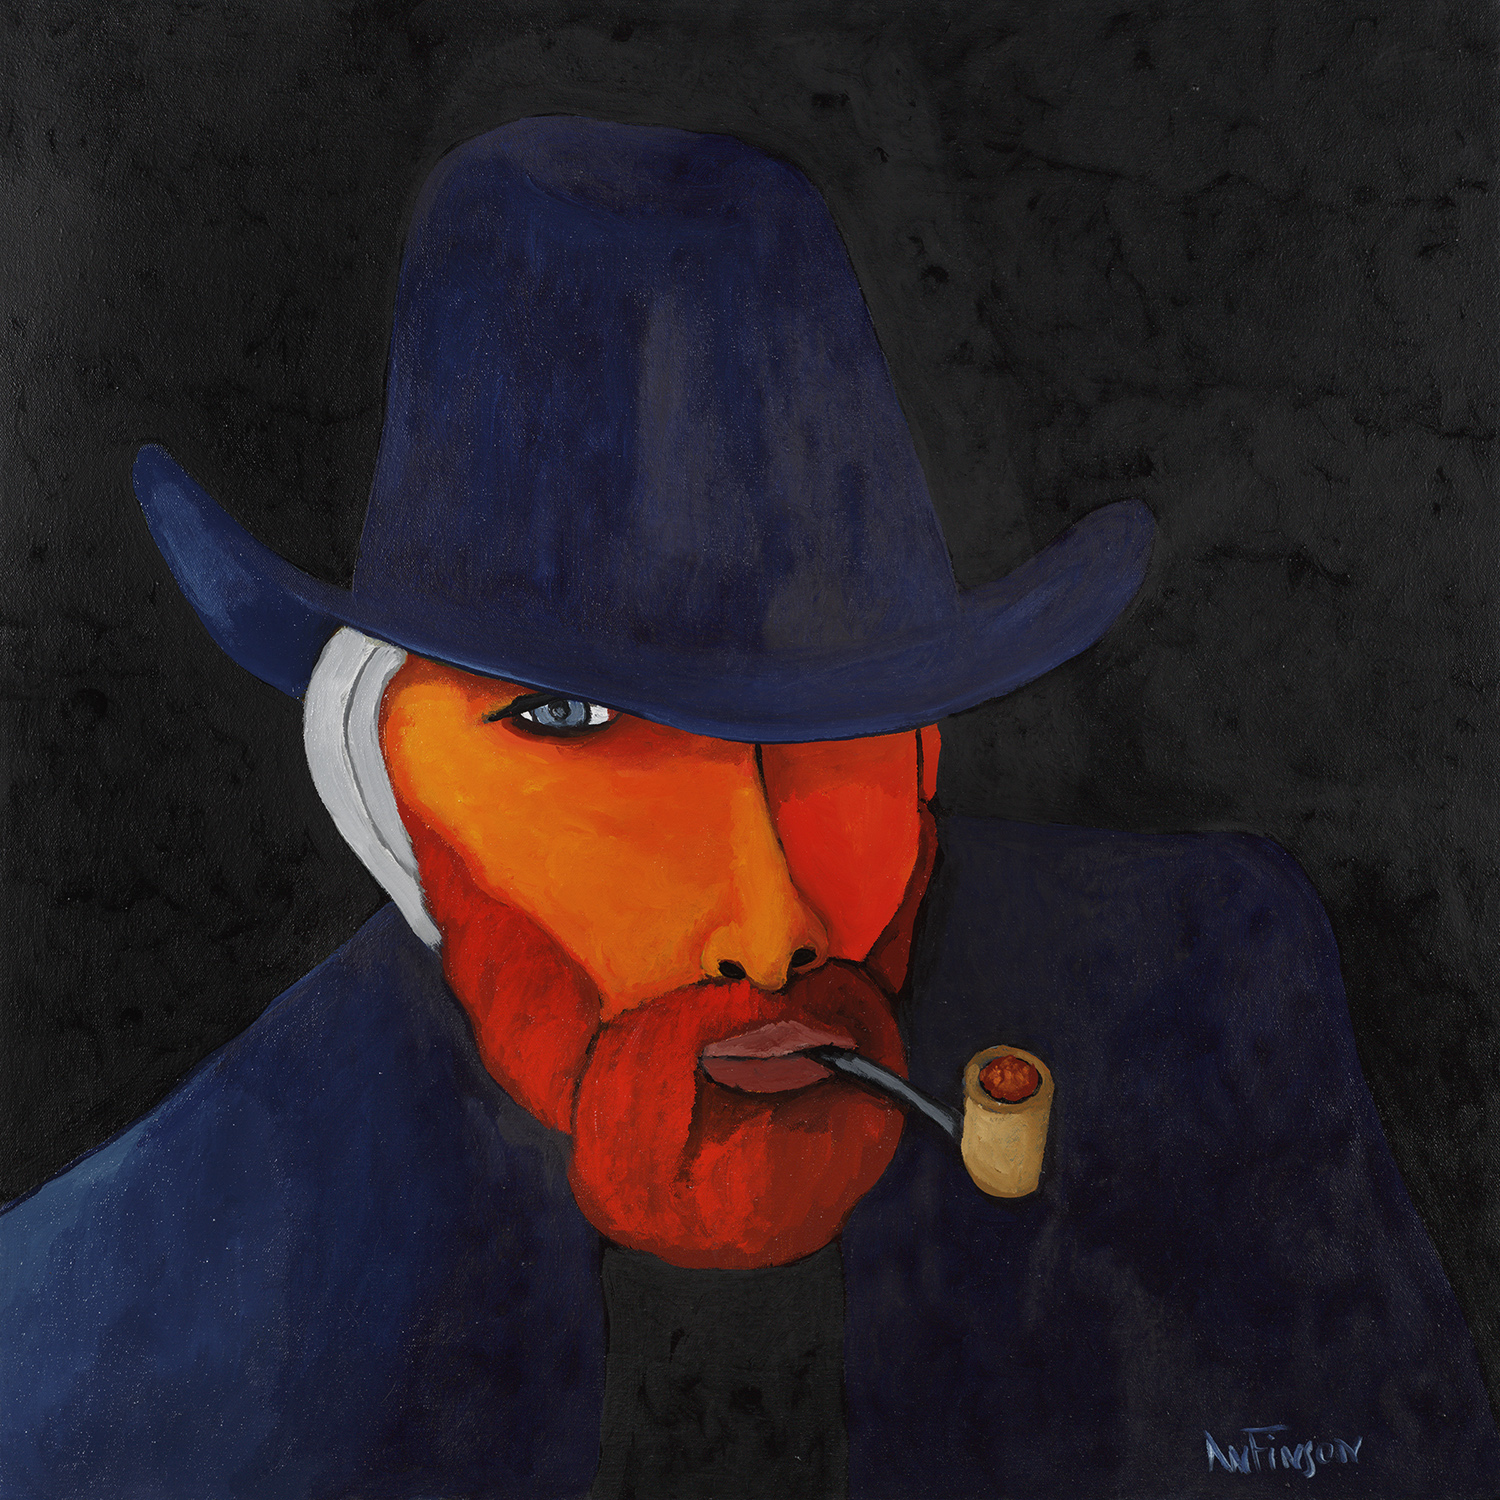  van gogh was a cowboy  private collection  30 x 30 2010 